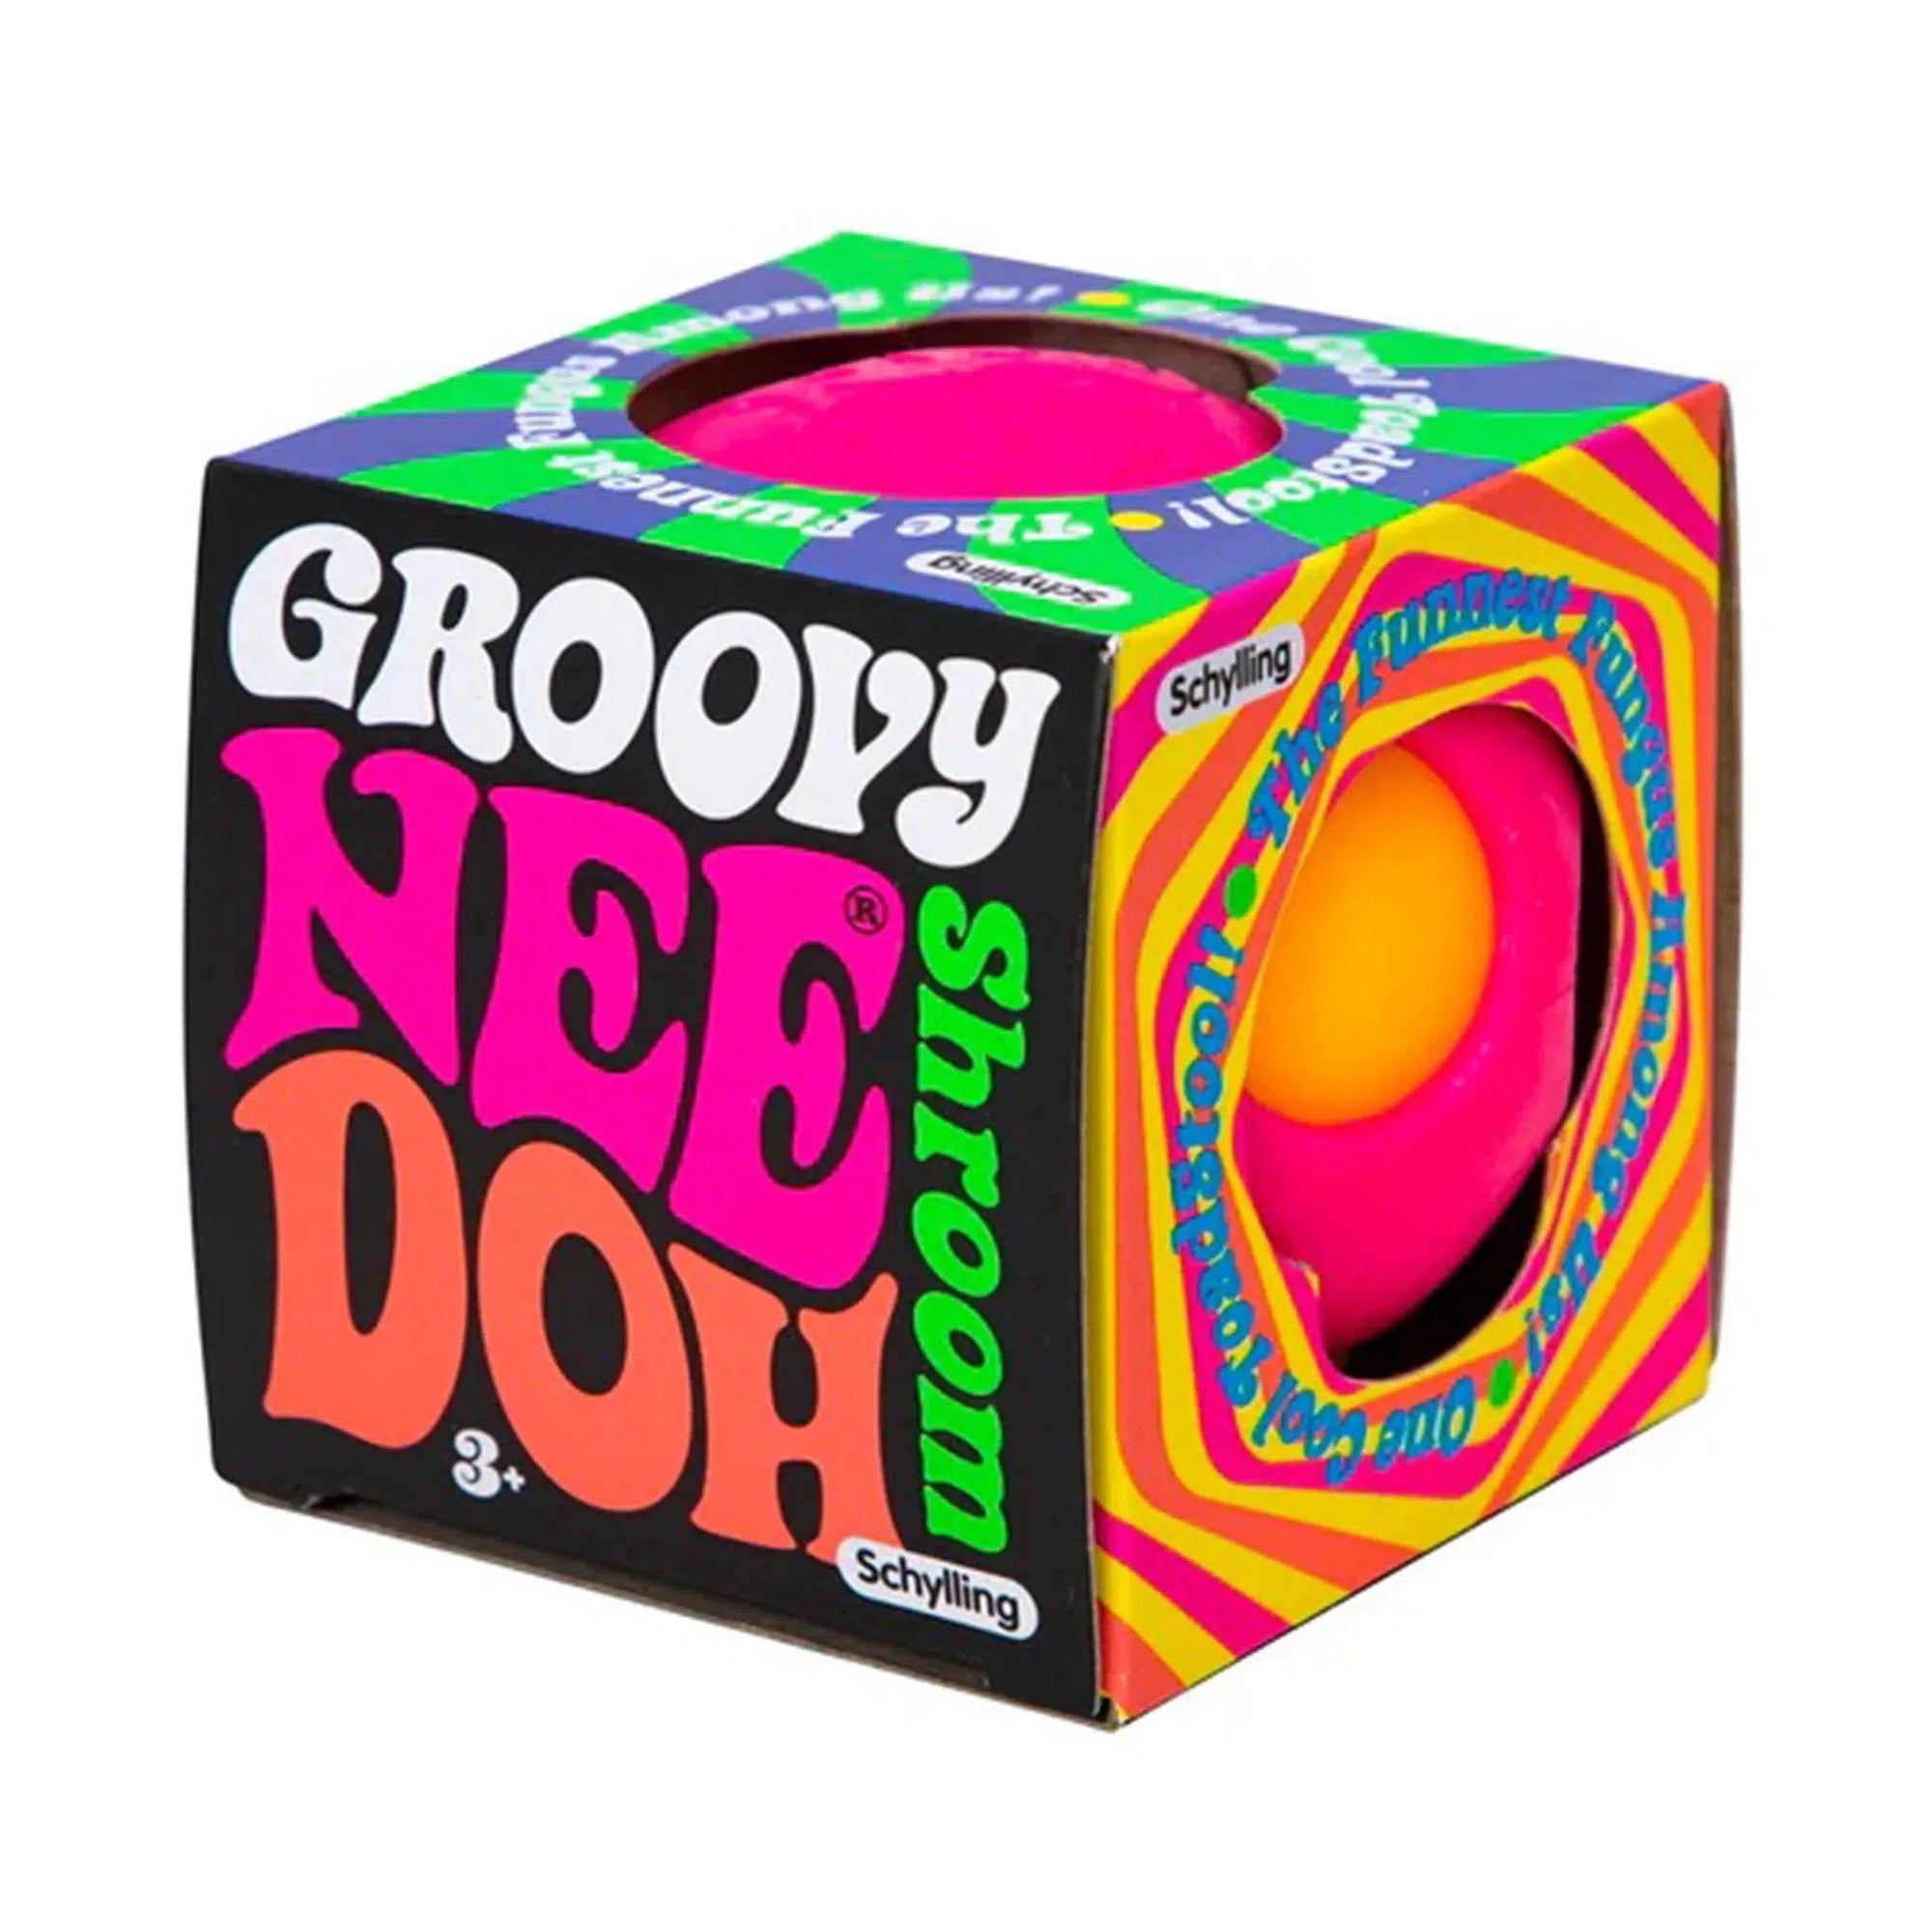 Front view of a Nee Doh Shroom pink and orange in its packaging.